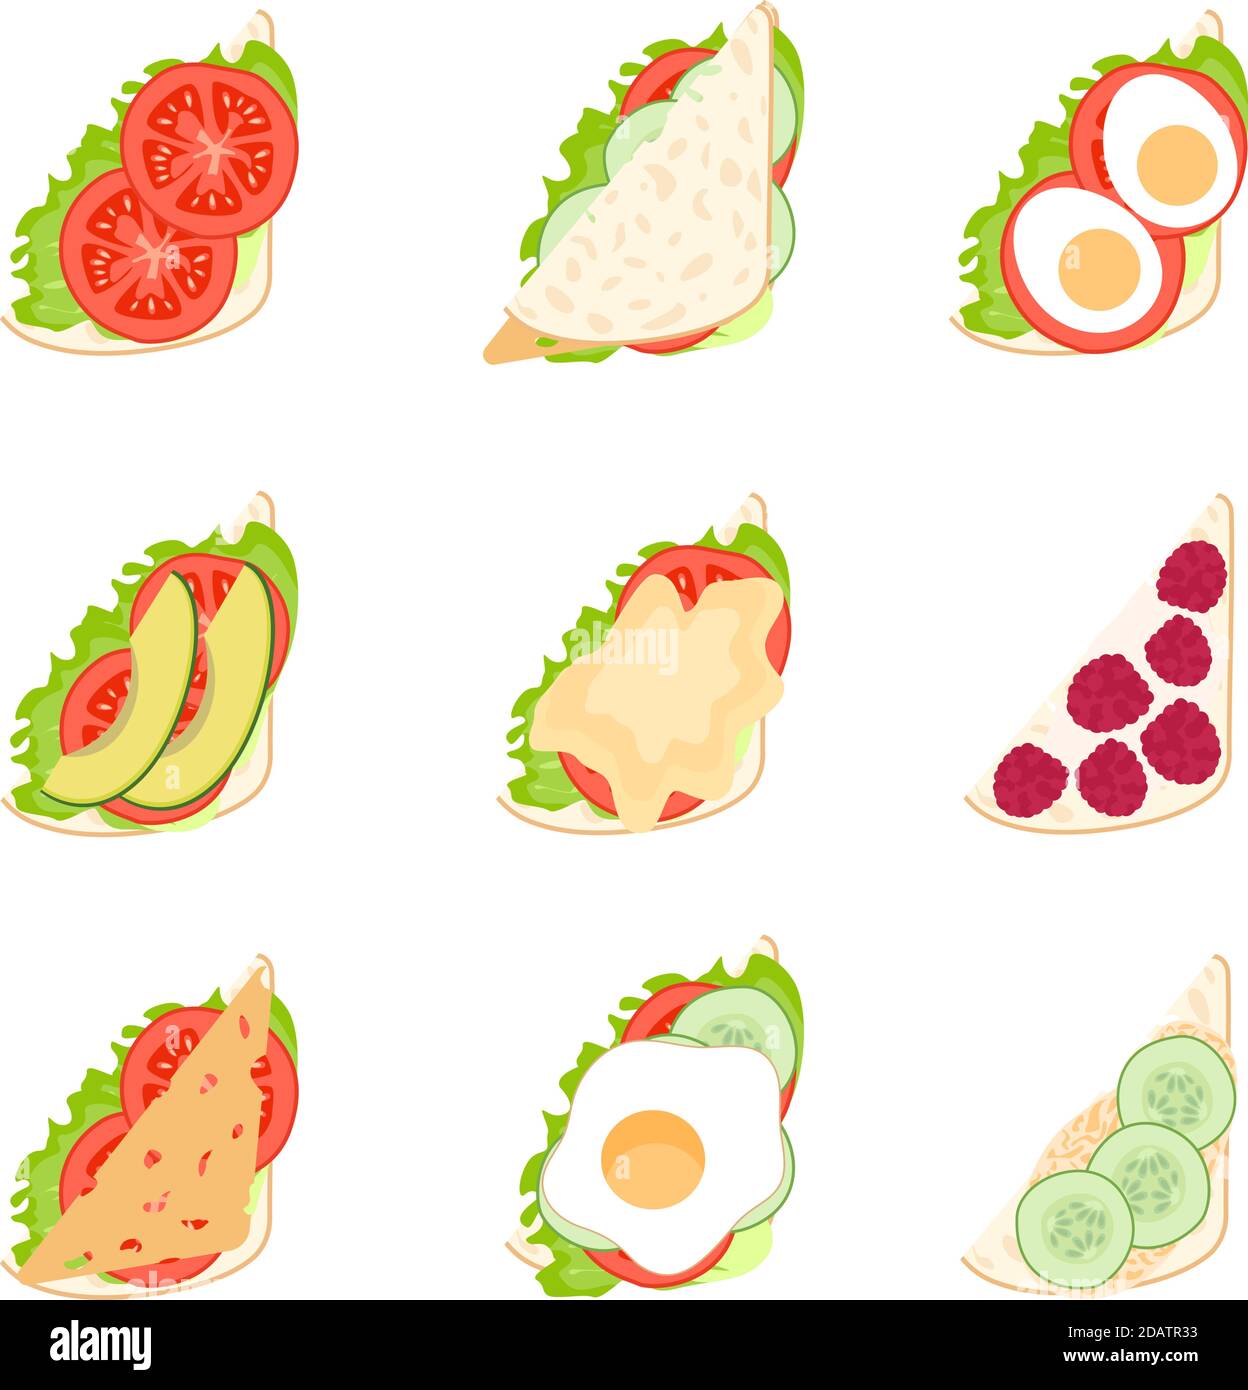 set of sandwiches top view, different filling options, healthy food vegetarian vegetables Stock Vector